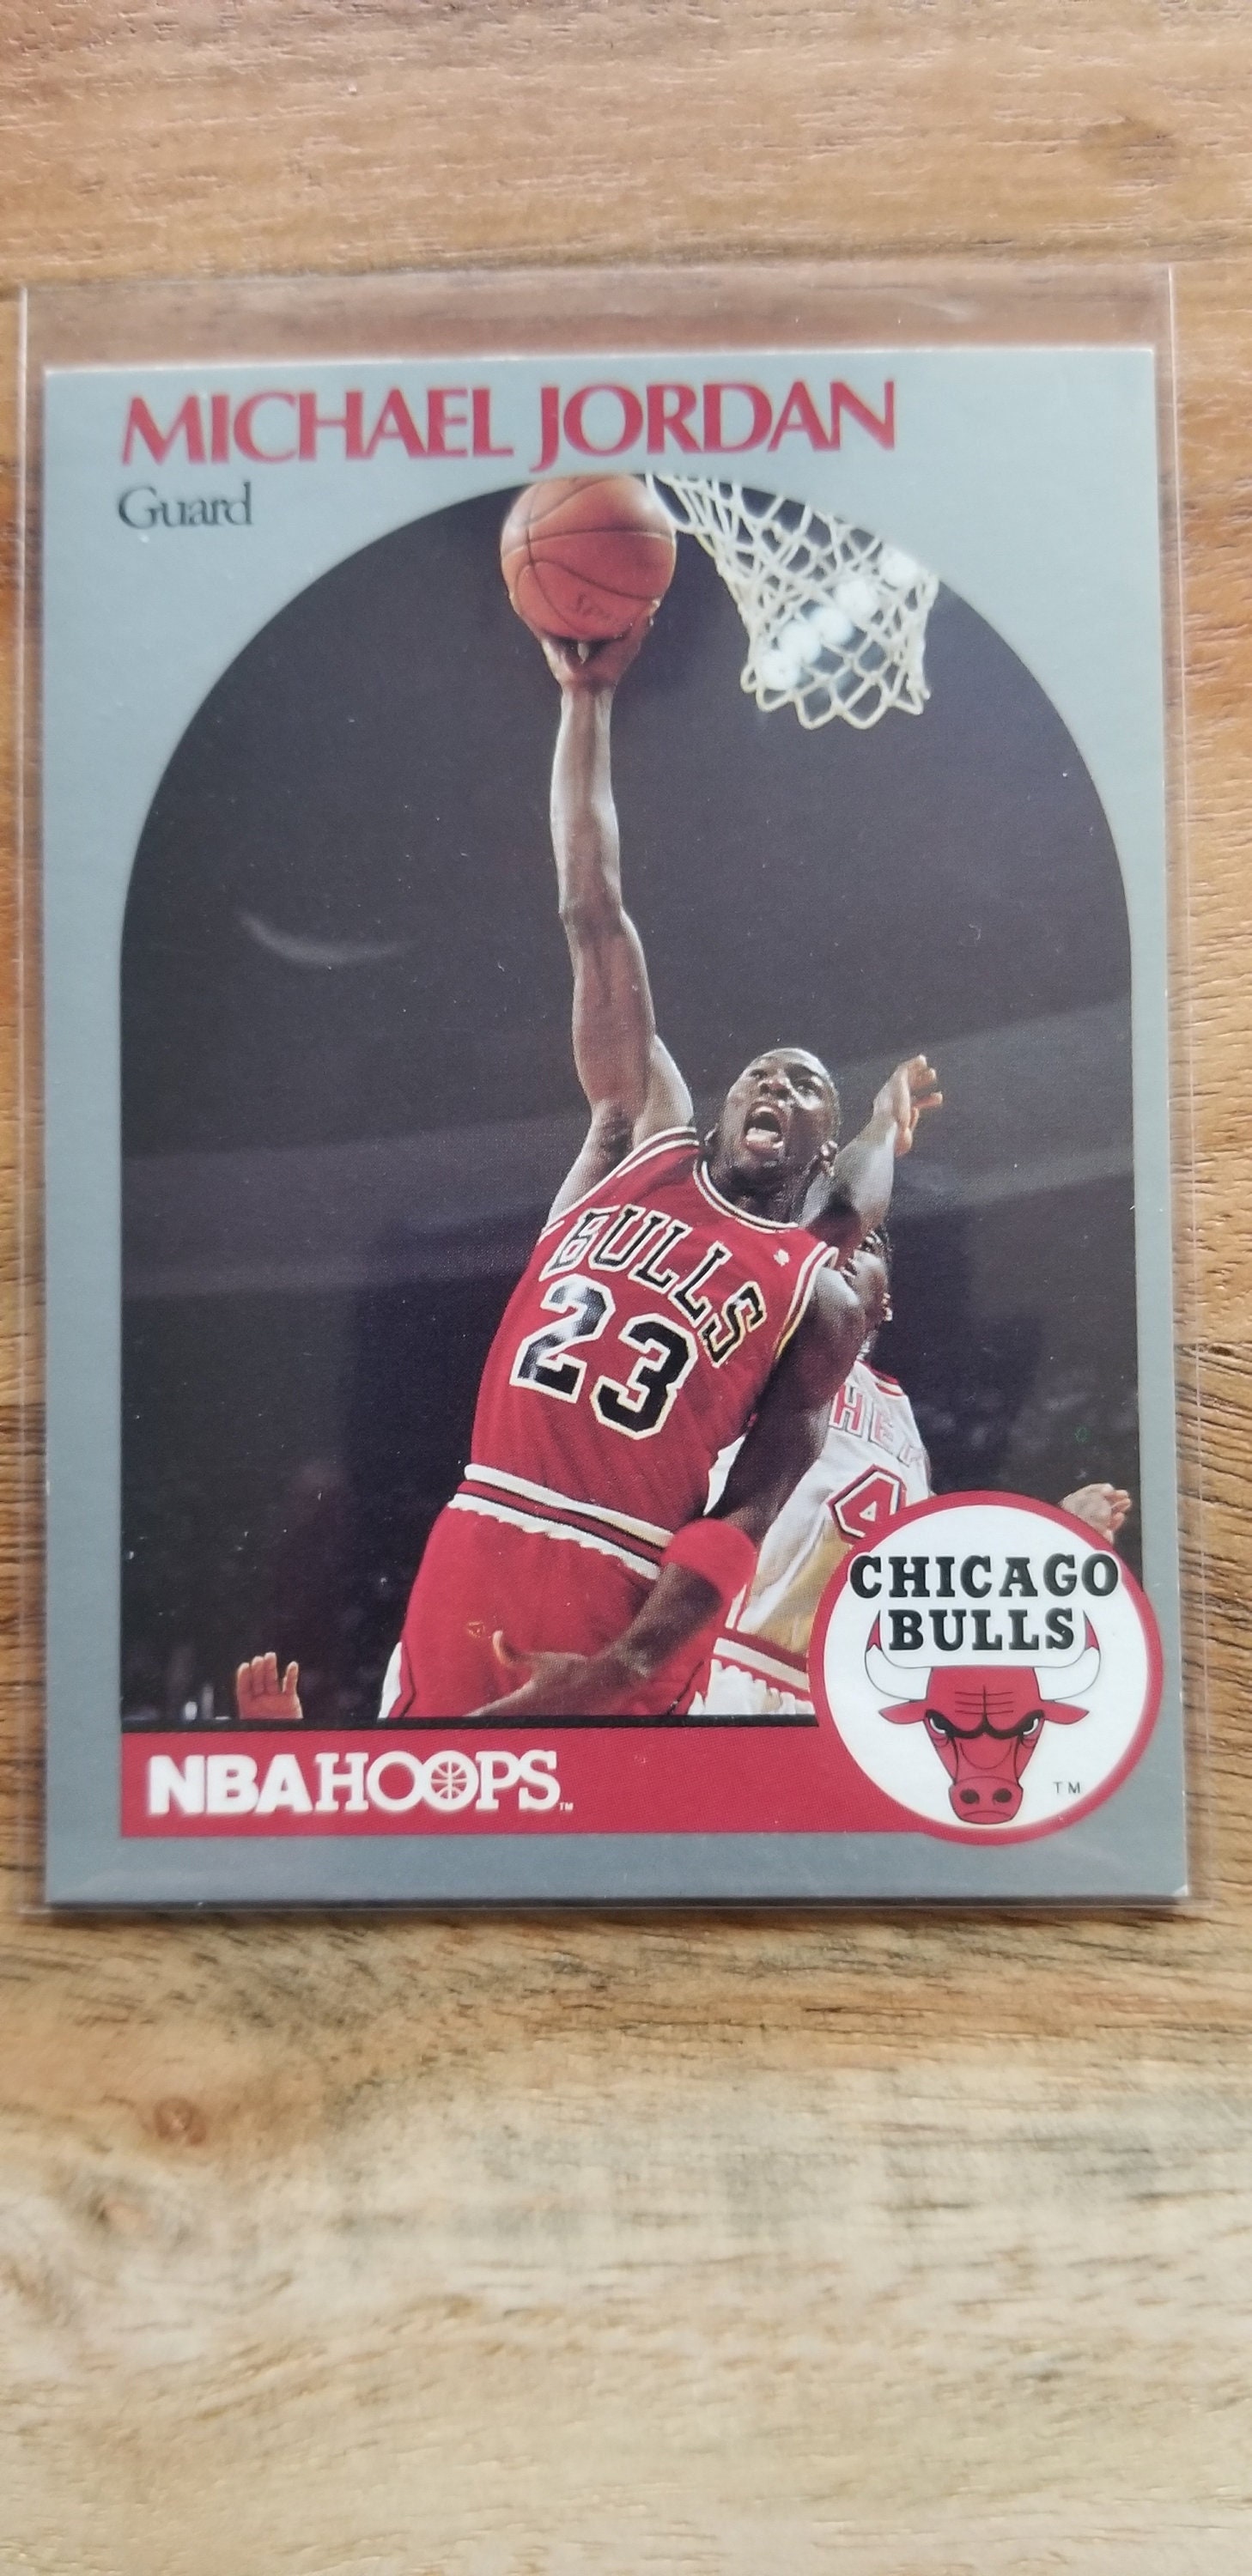 Top 15 Most Valuable 1990 NBA HOOPS All Star Cards From The 1990